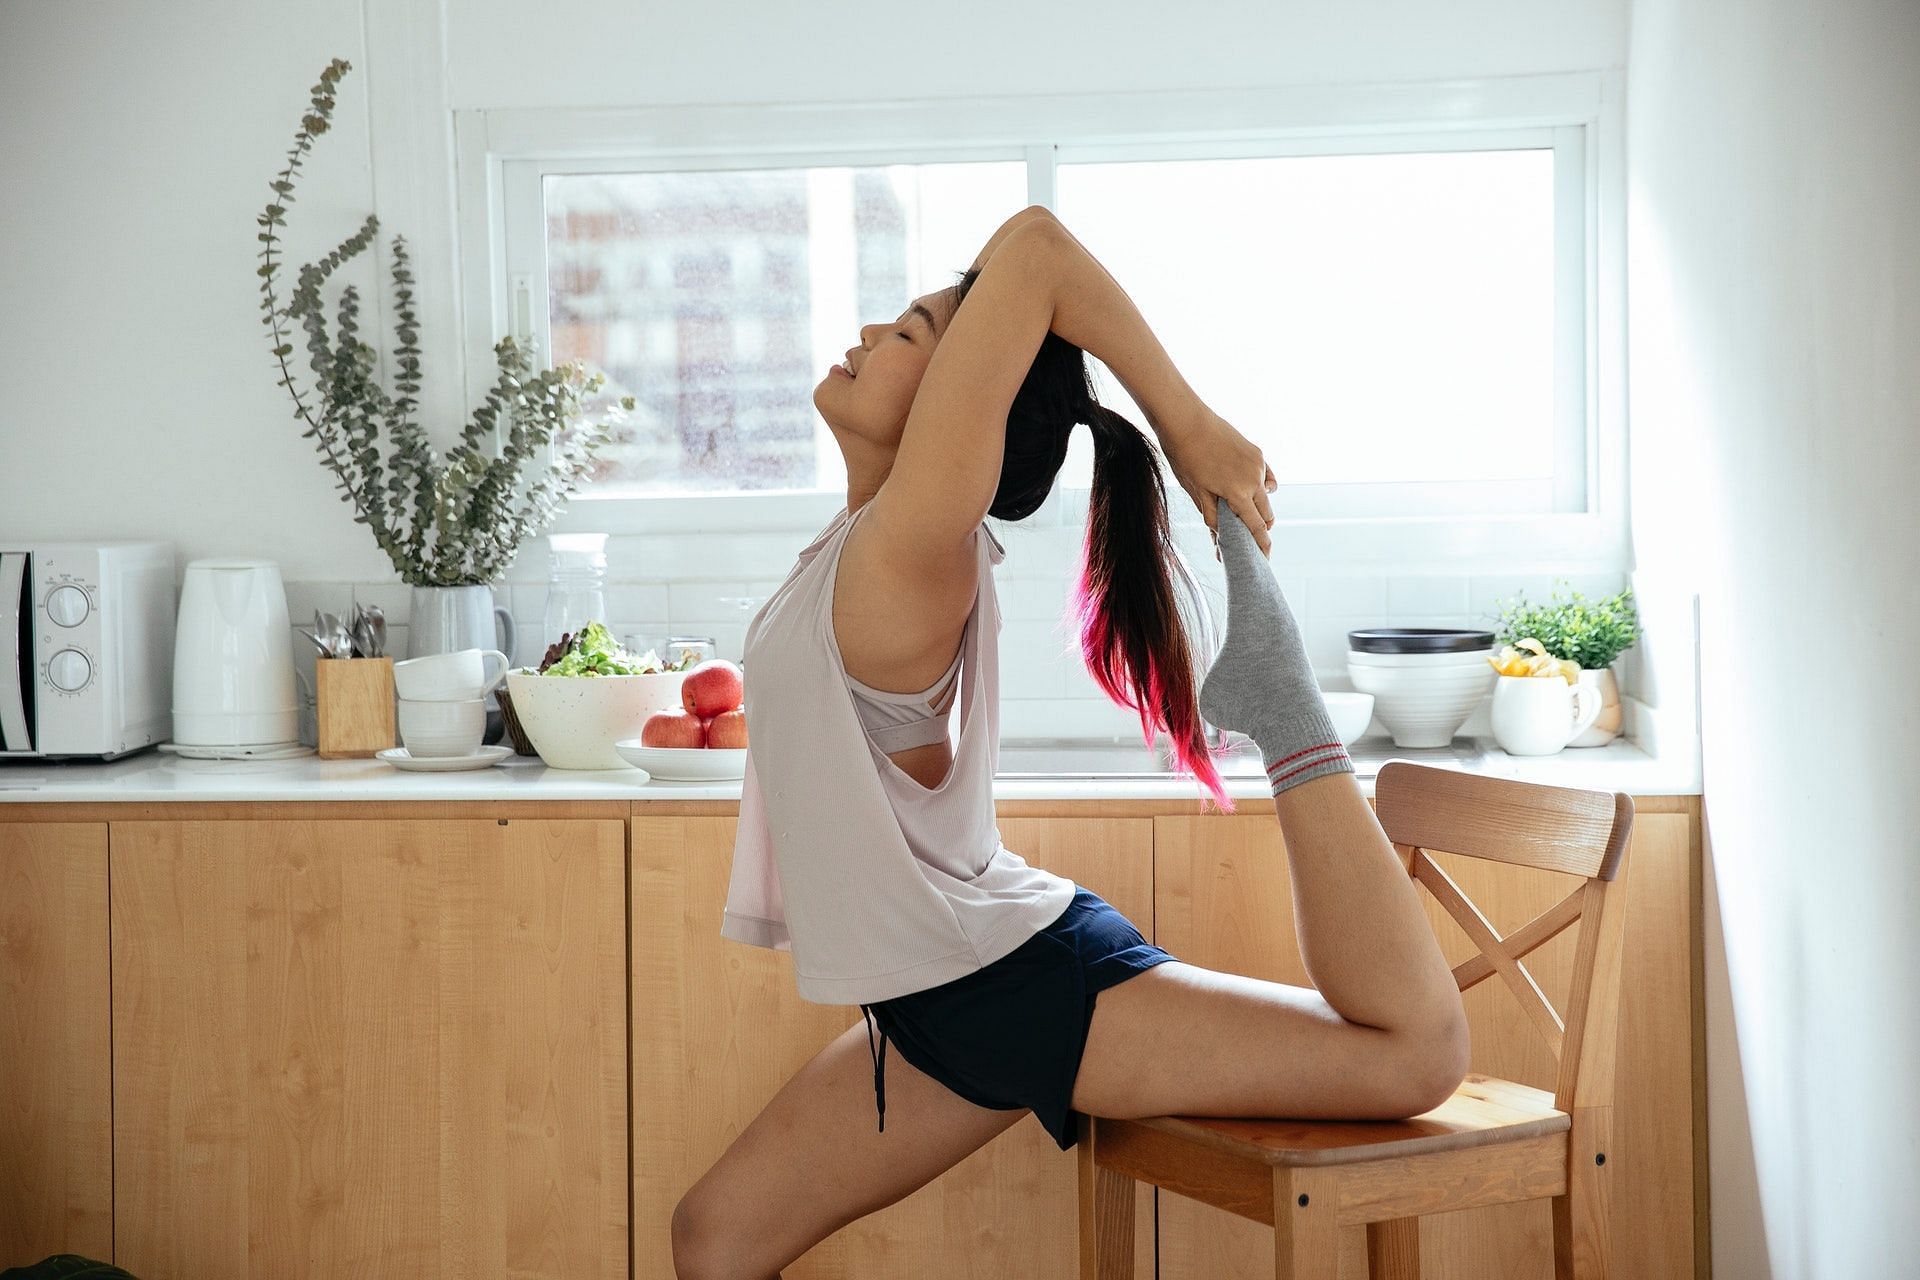 10 Chair Yoga Poses You Can Do at Home